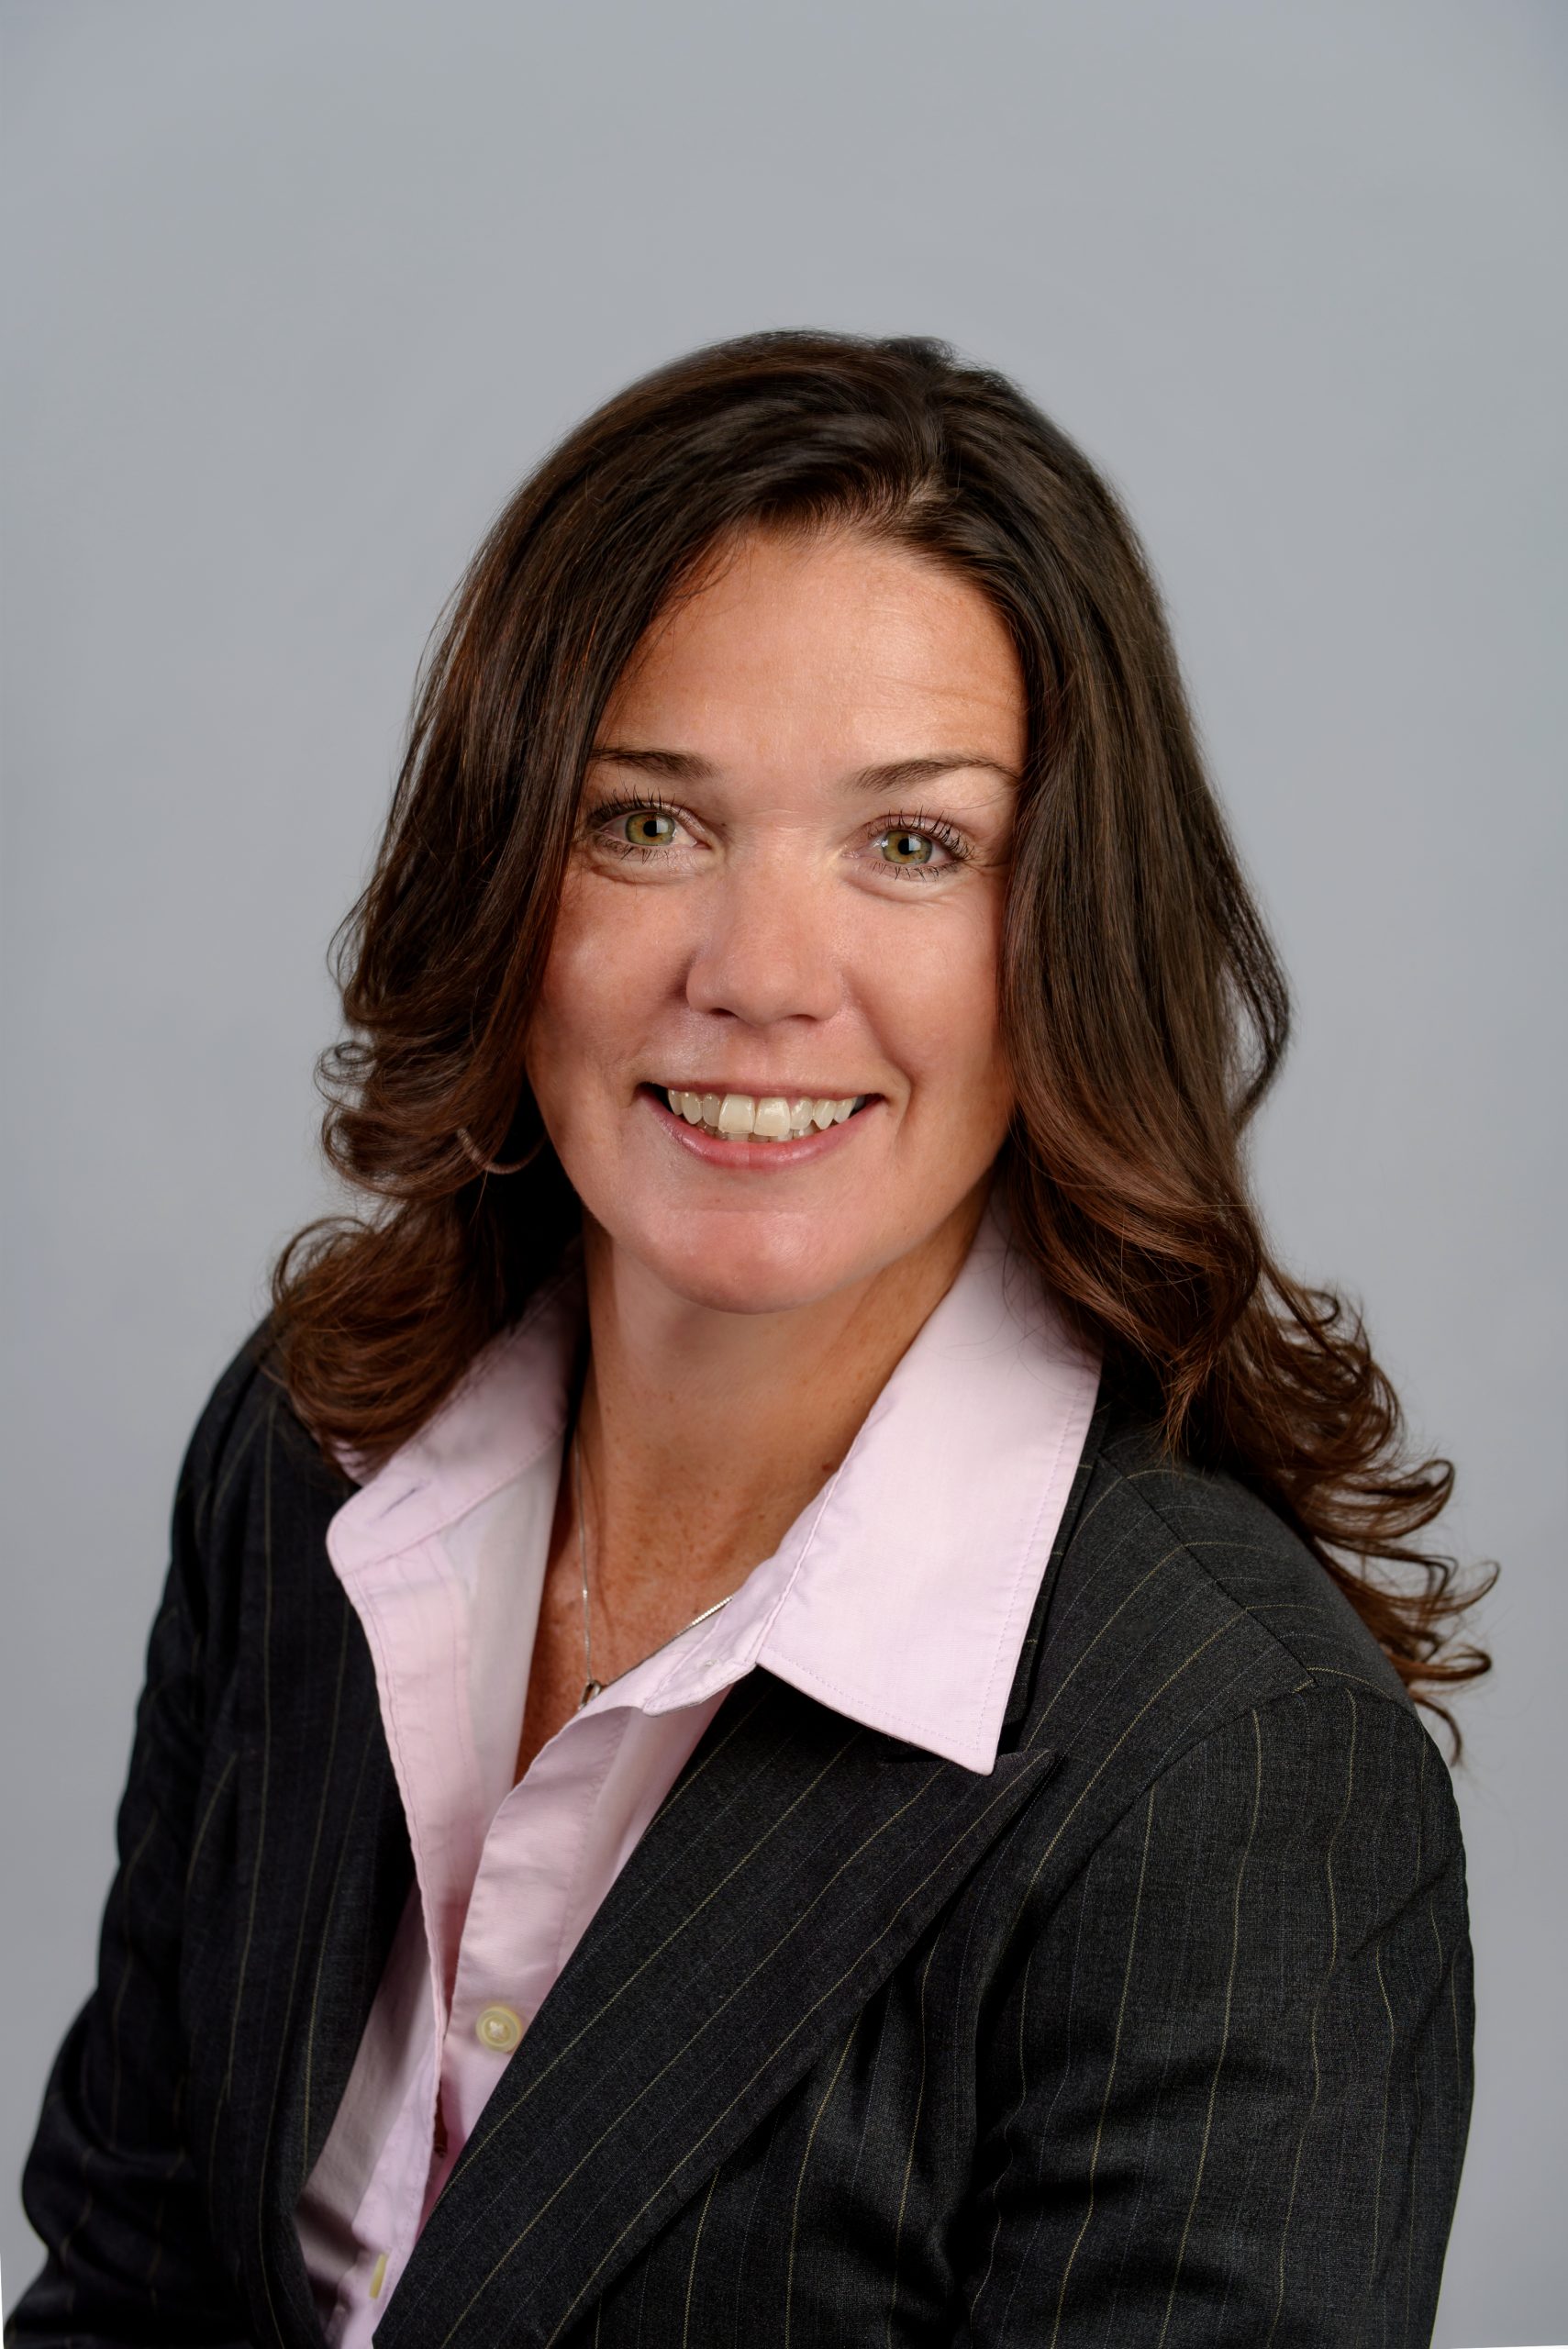 Photo of Christine Holmes, CEO and founder of LawyersInHouse.com